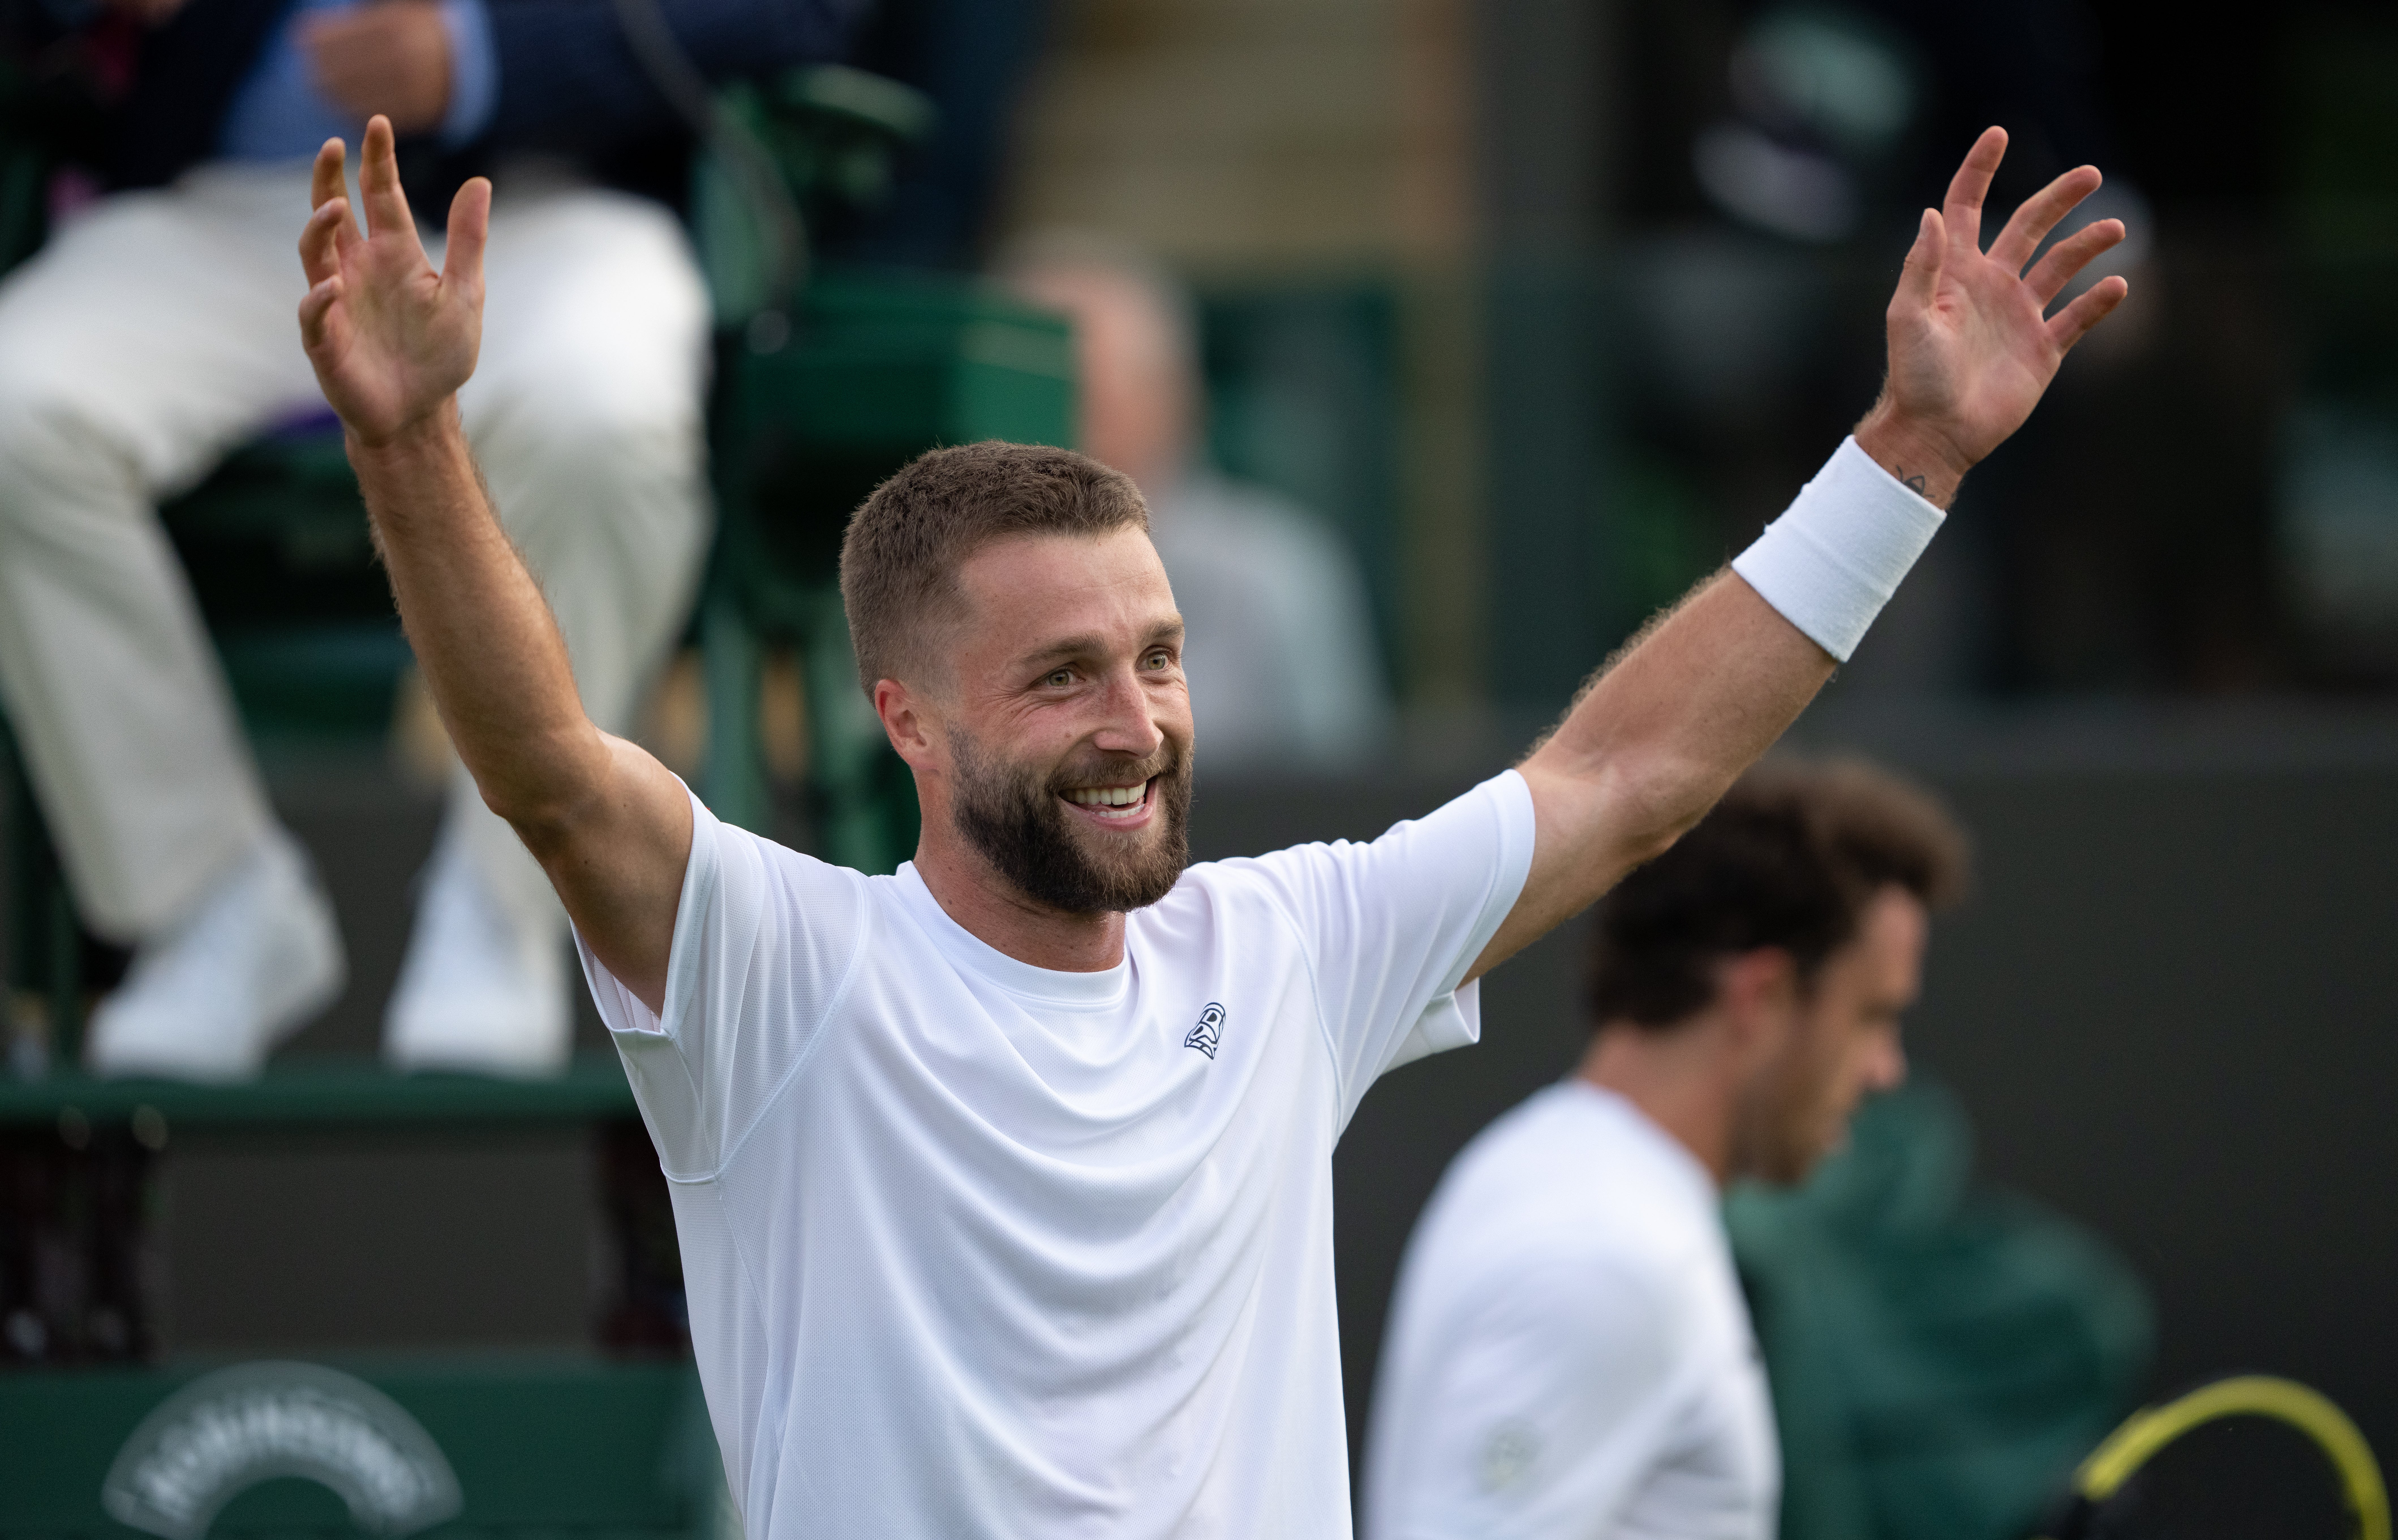 Liam Broady celebrates after defeating Marco Cecchinato at Wimbledon